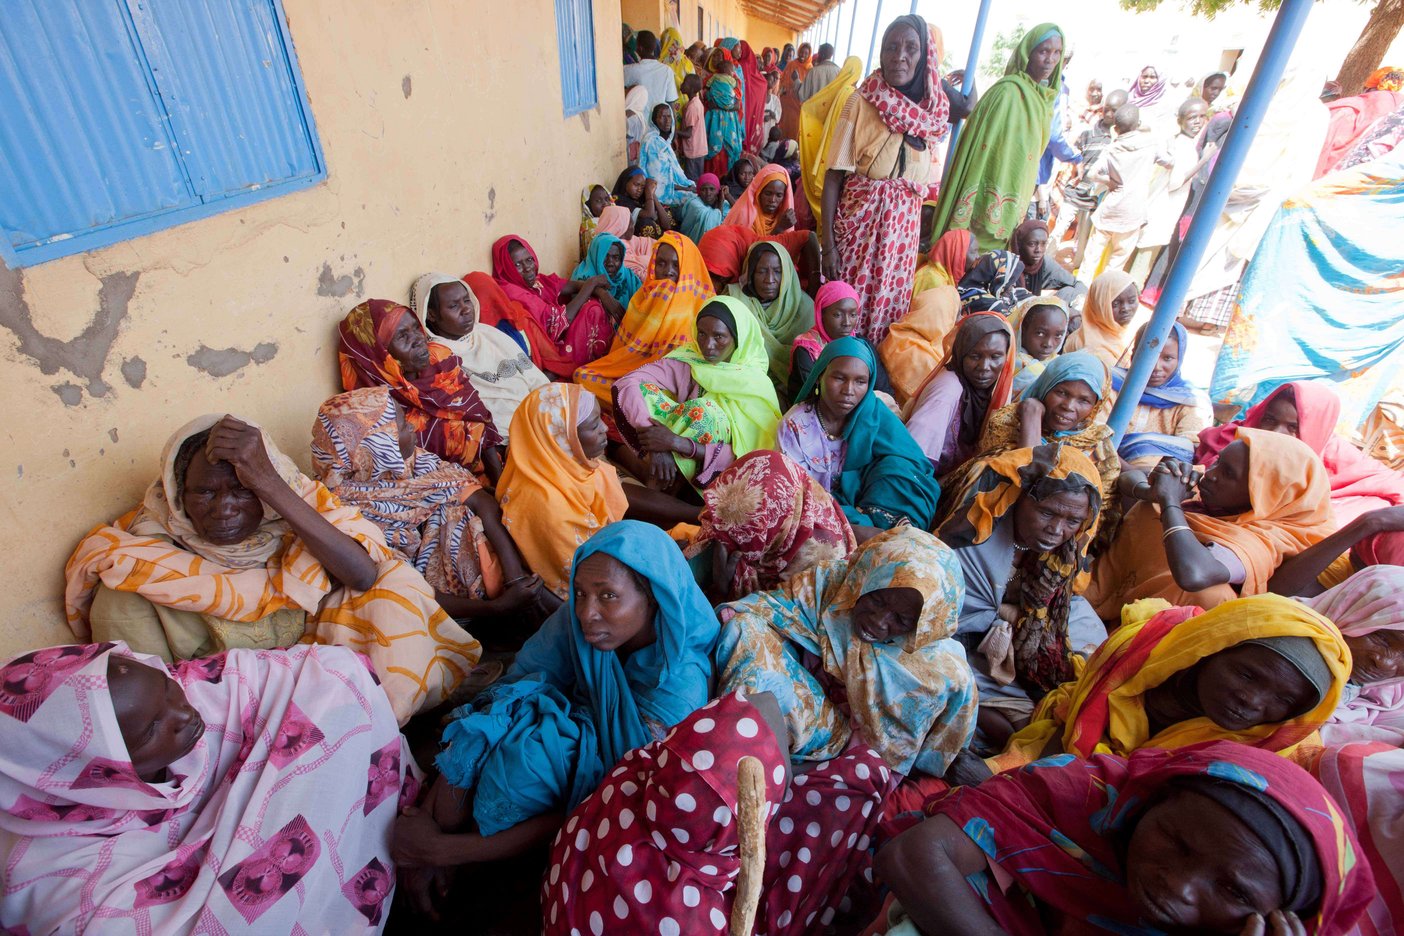 Sudanese women waiting to be examined by doctors at a medical centre near the Kassab camp in the Norhtn Darfur town of Kutum on 9 August AFP PHOTO / UNAMID / ALBERT GONZALEZ FARRAN